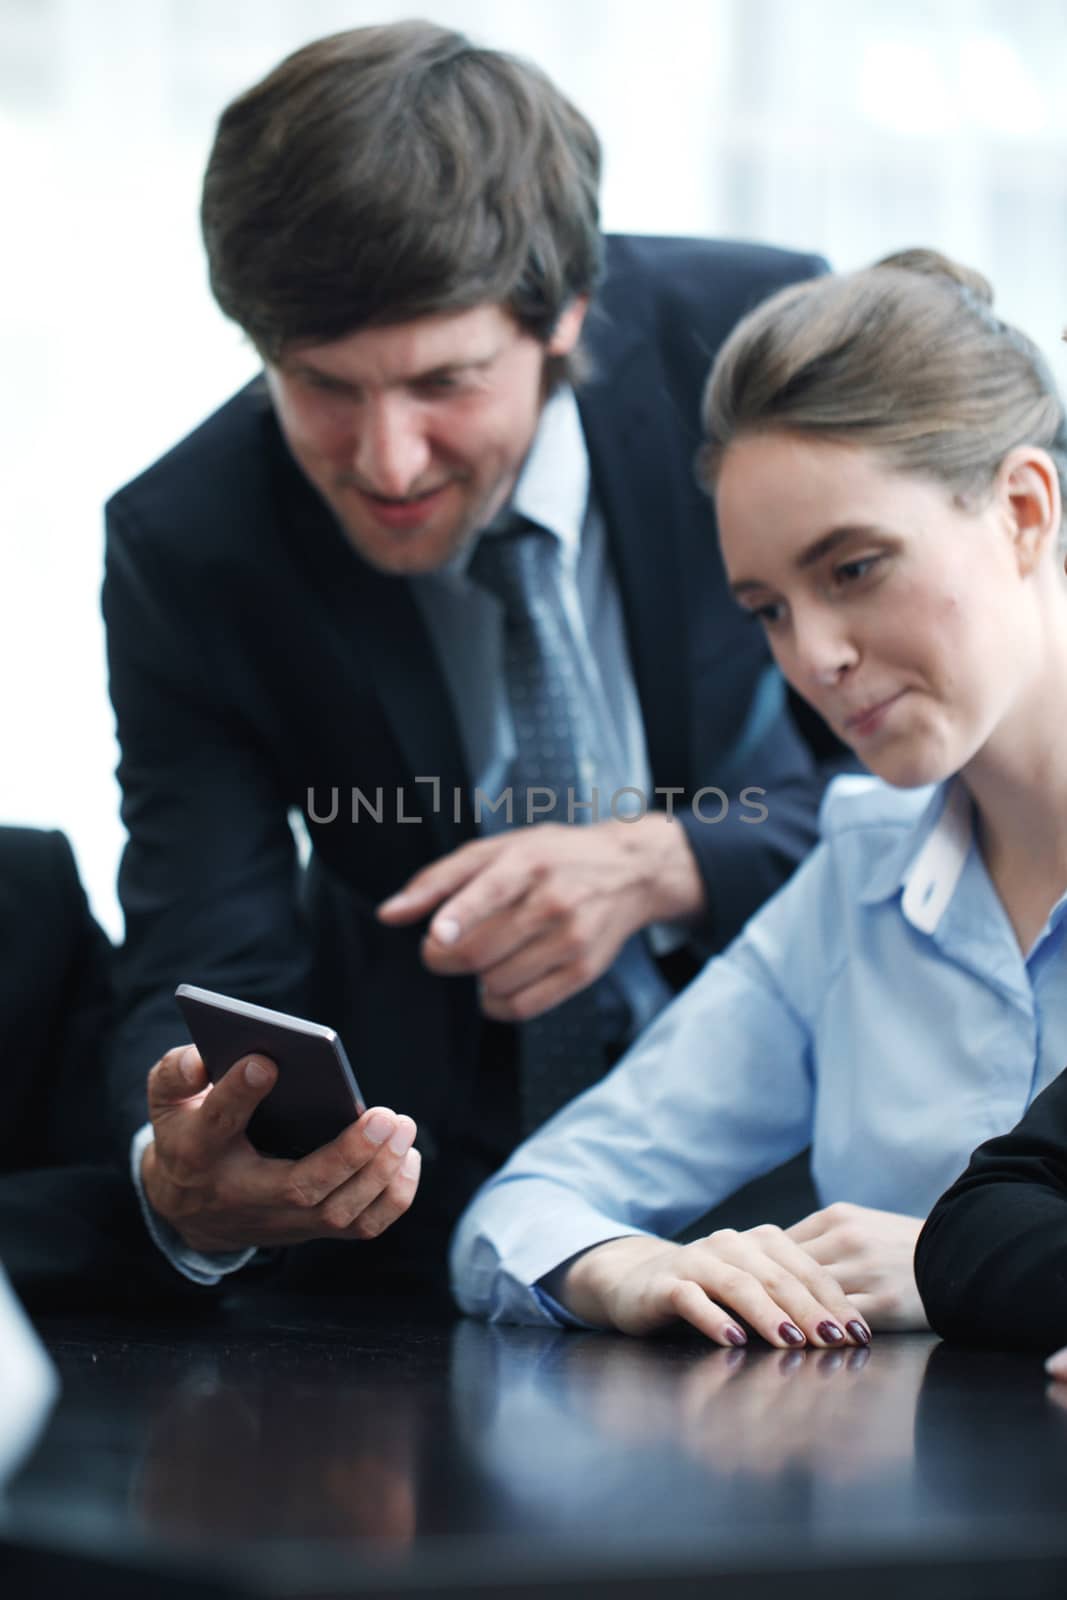 Group of business people working at office and using smartphone